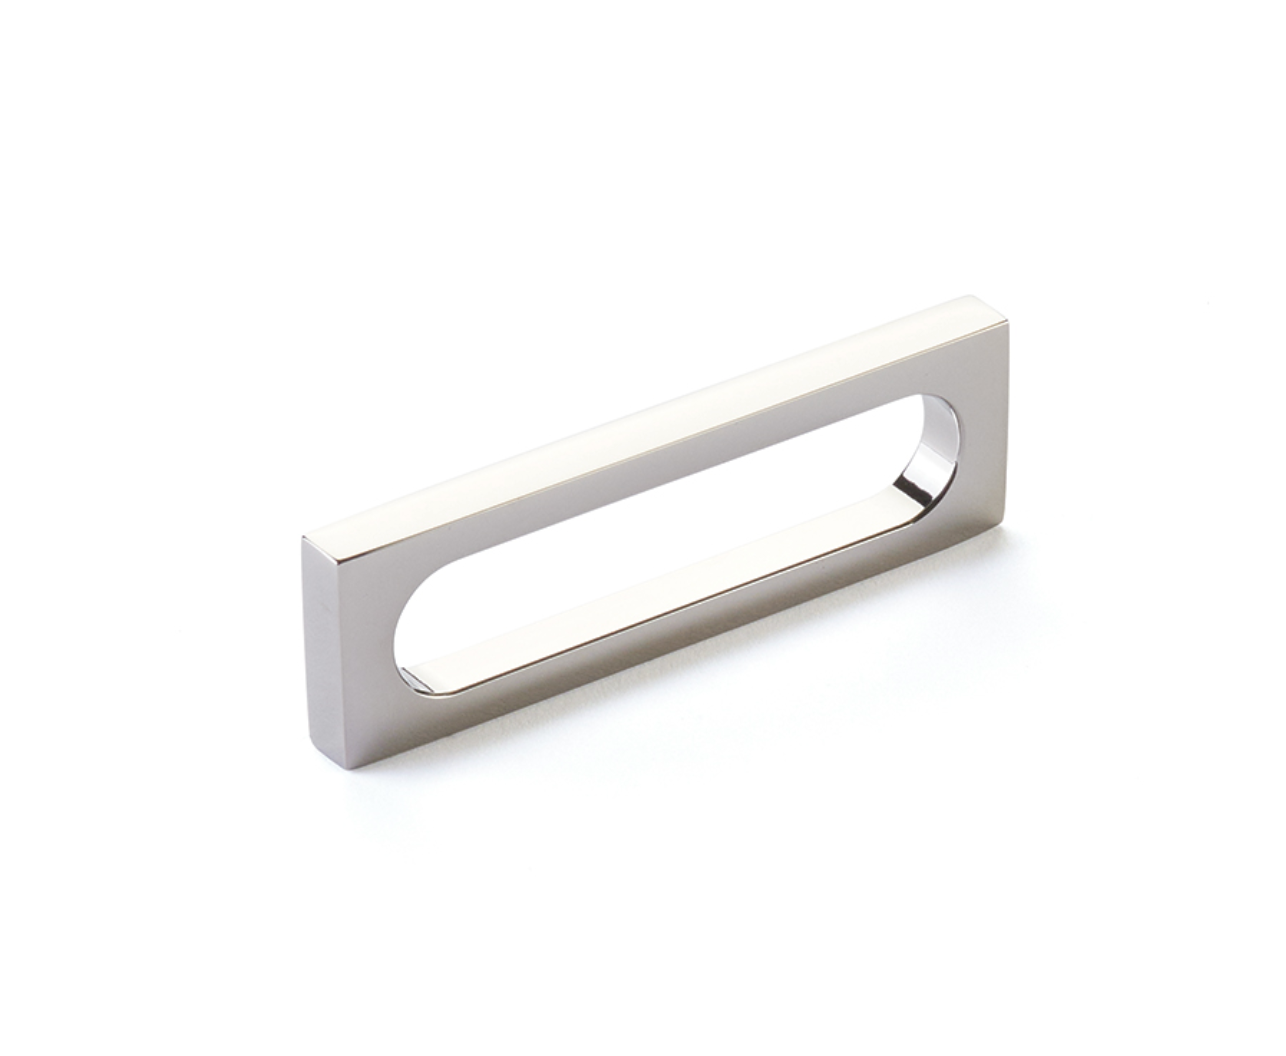 Polished Nickel "Loop" Square Drawer Pulls and Cabinet Knobs